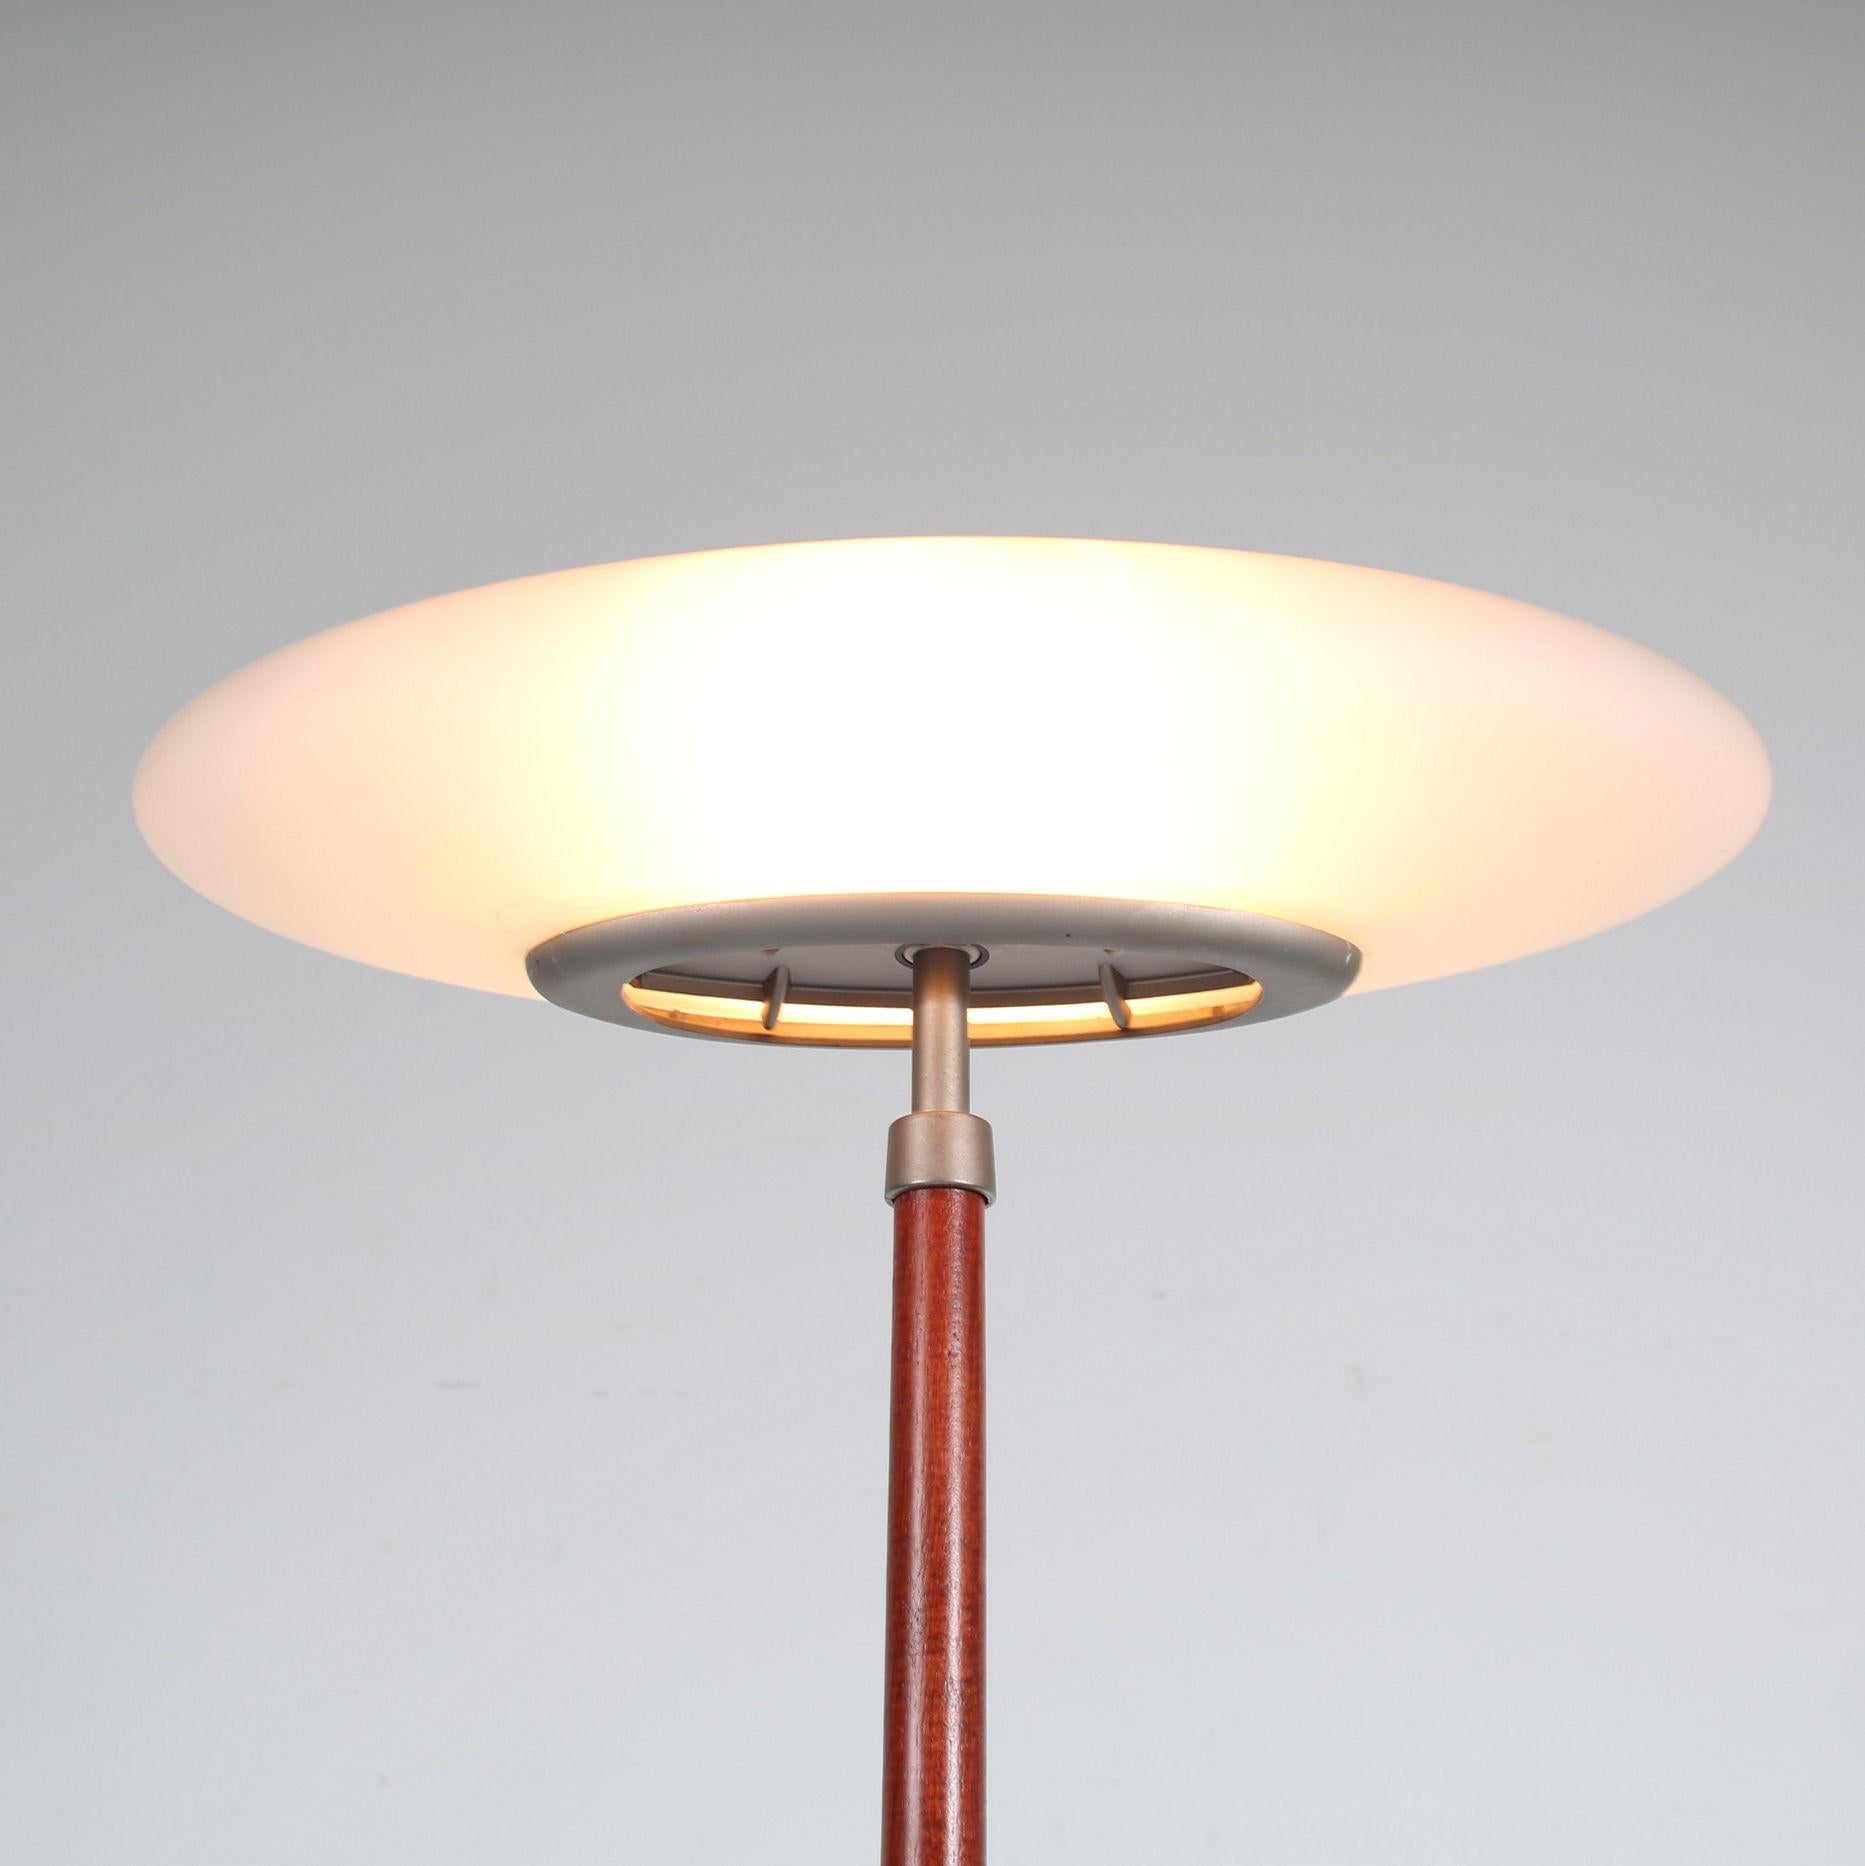 PAO Floor Lamp by Matteo Thun for Arteluce, Italy 1990 For Sale 3